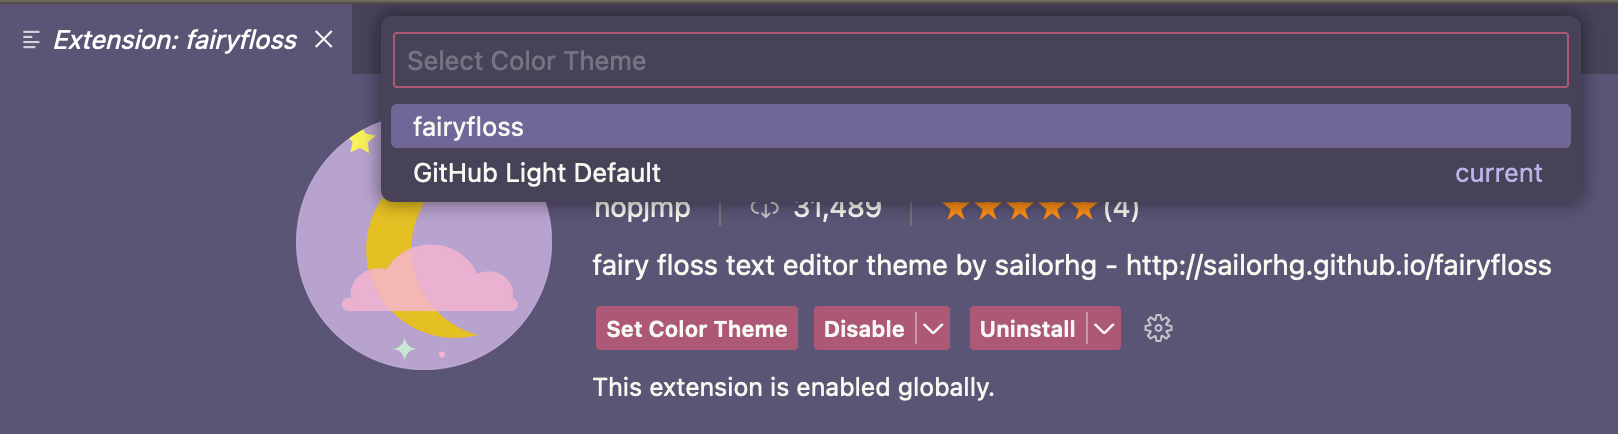 Screenshot of the "Select Color Theme" dropdown, with the "fairyfloss" theme selected.